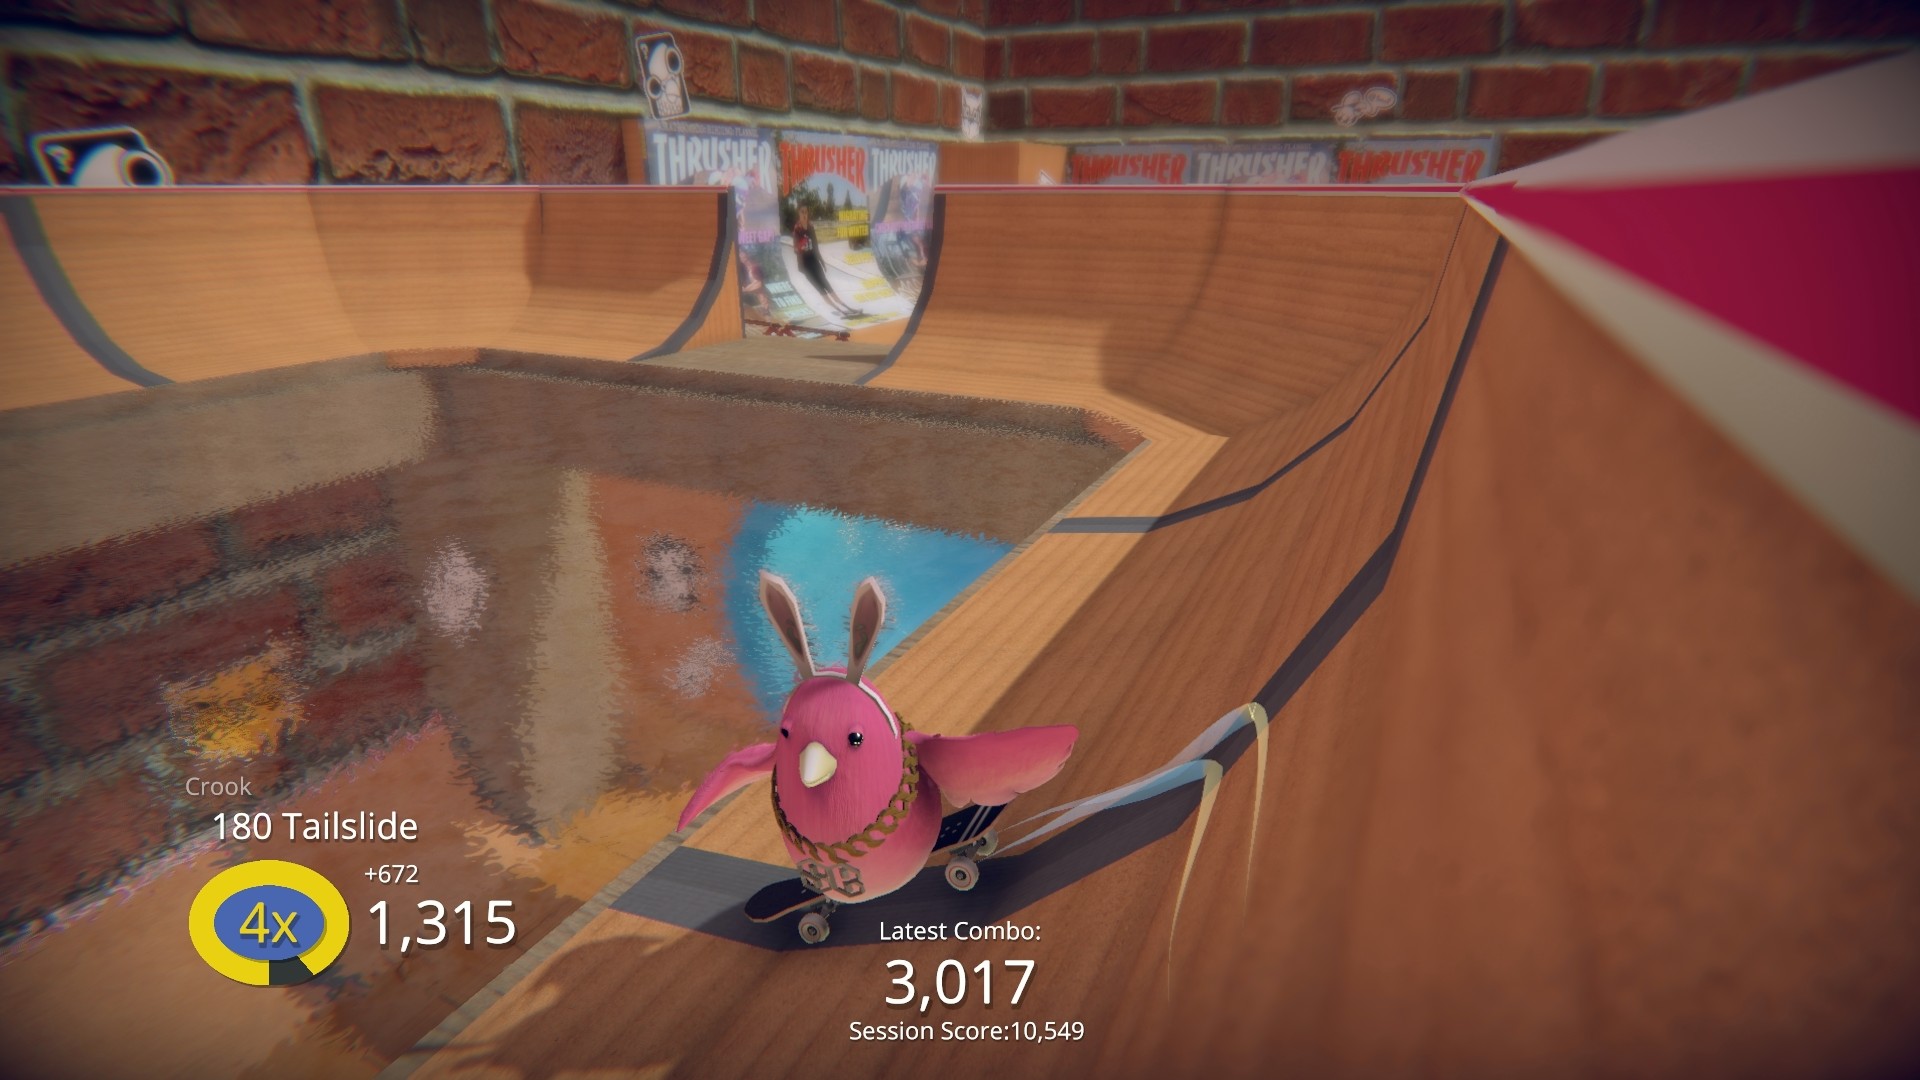 It will be fun to play as a skateboarding bird on the Xbox One